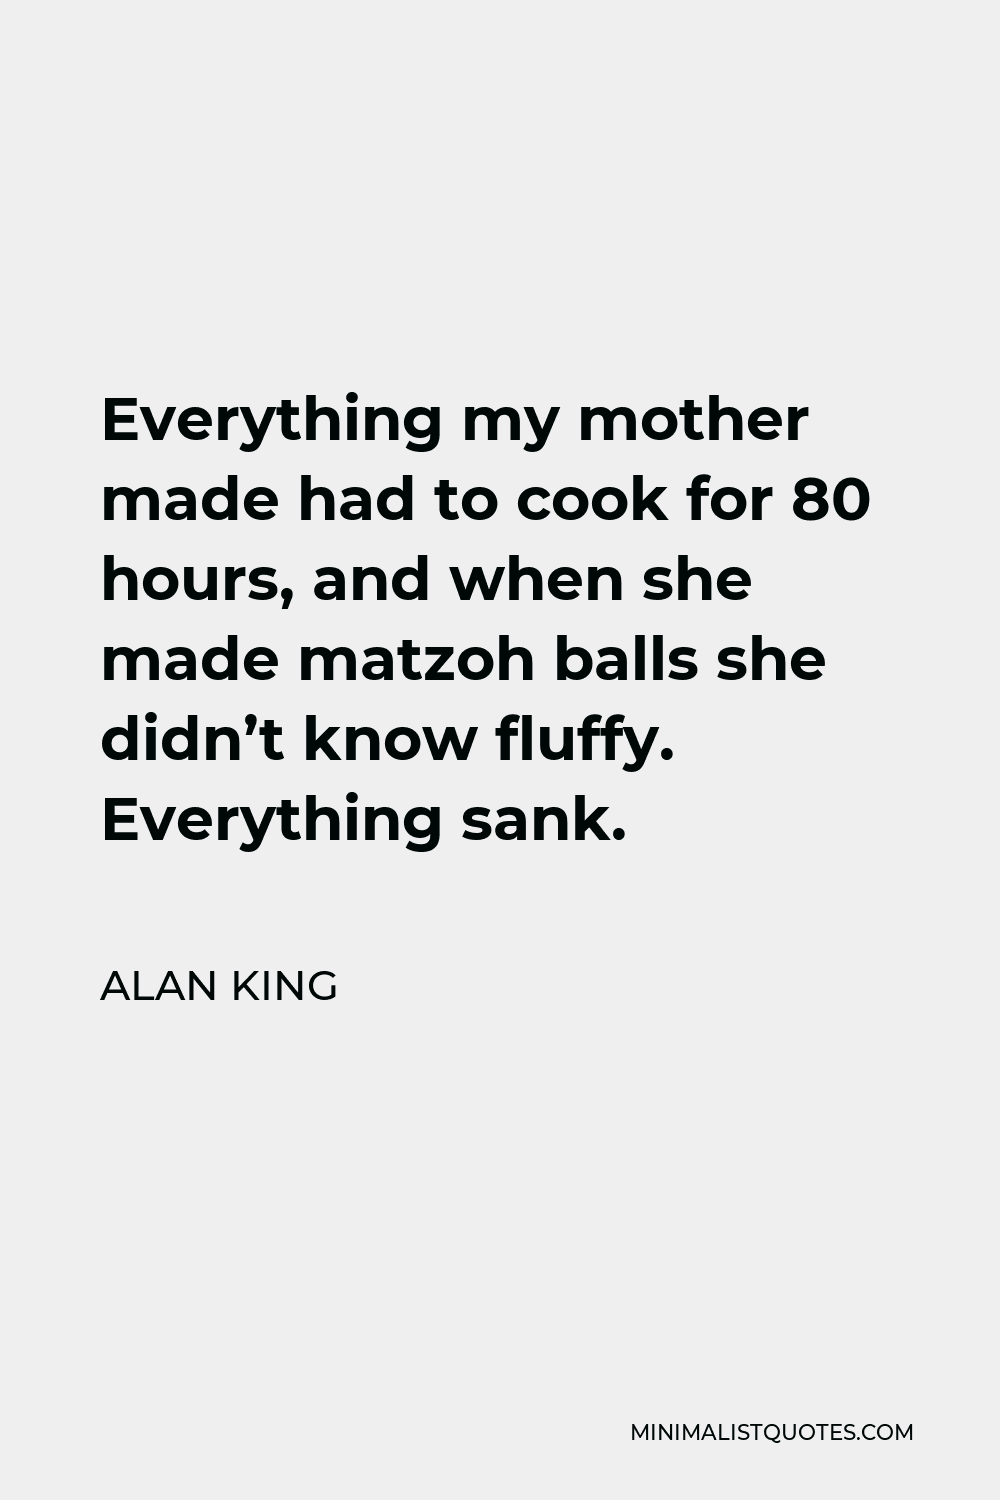 Alan King Quote - Everything my mother made had to cook for 80 hours, and when she made matzoh balls she didn’t know fluffy. Everything sank.